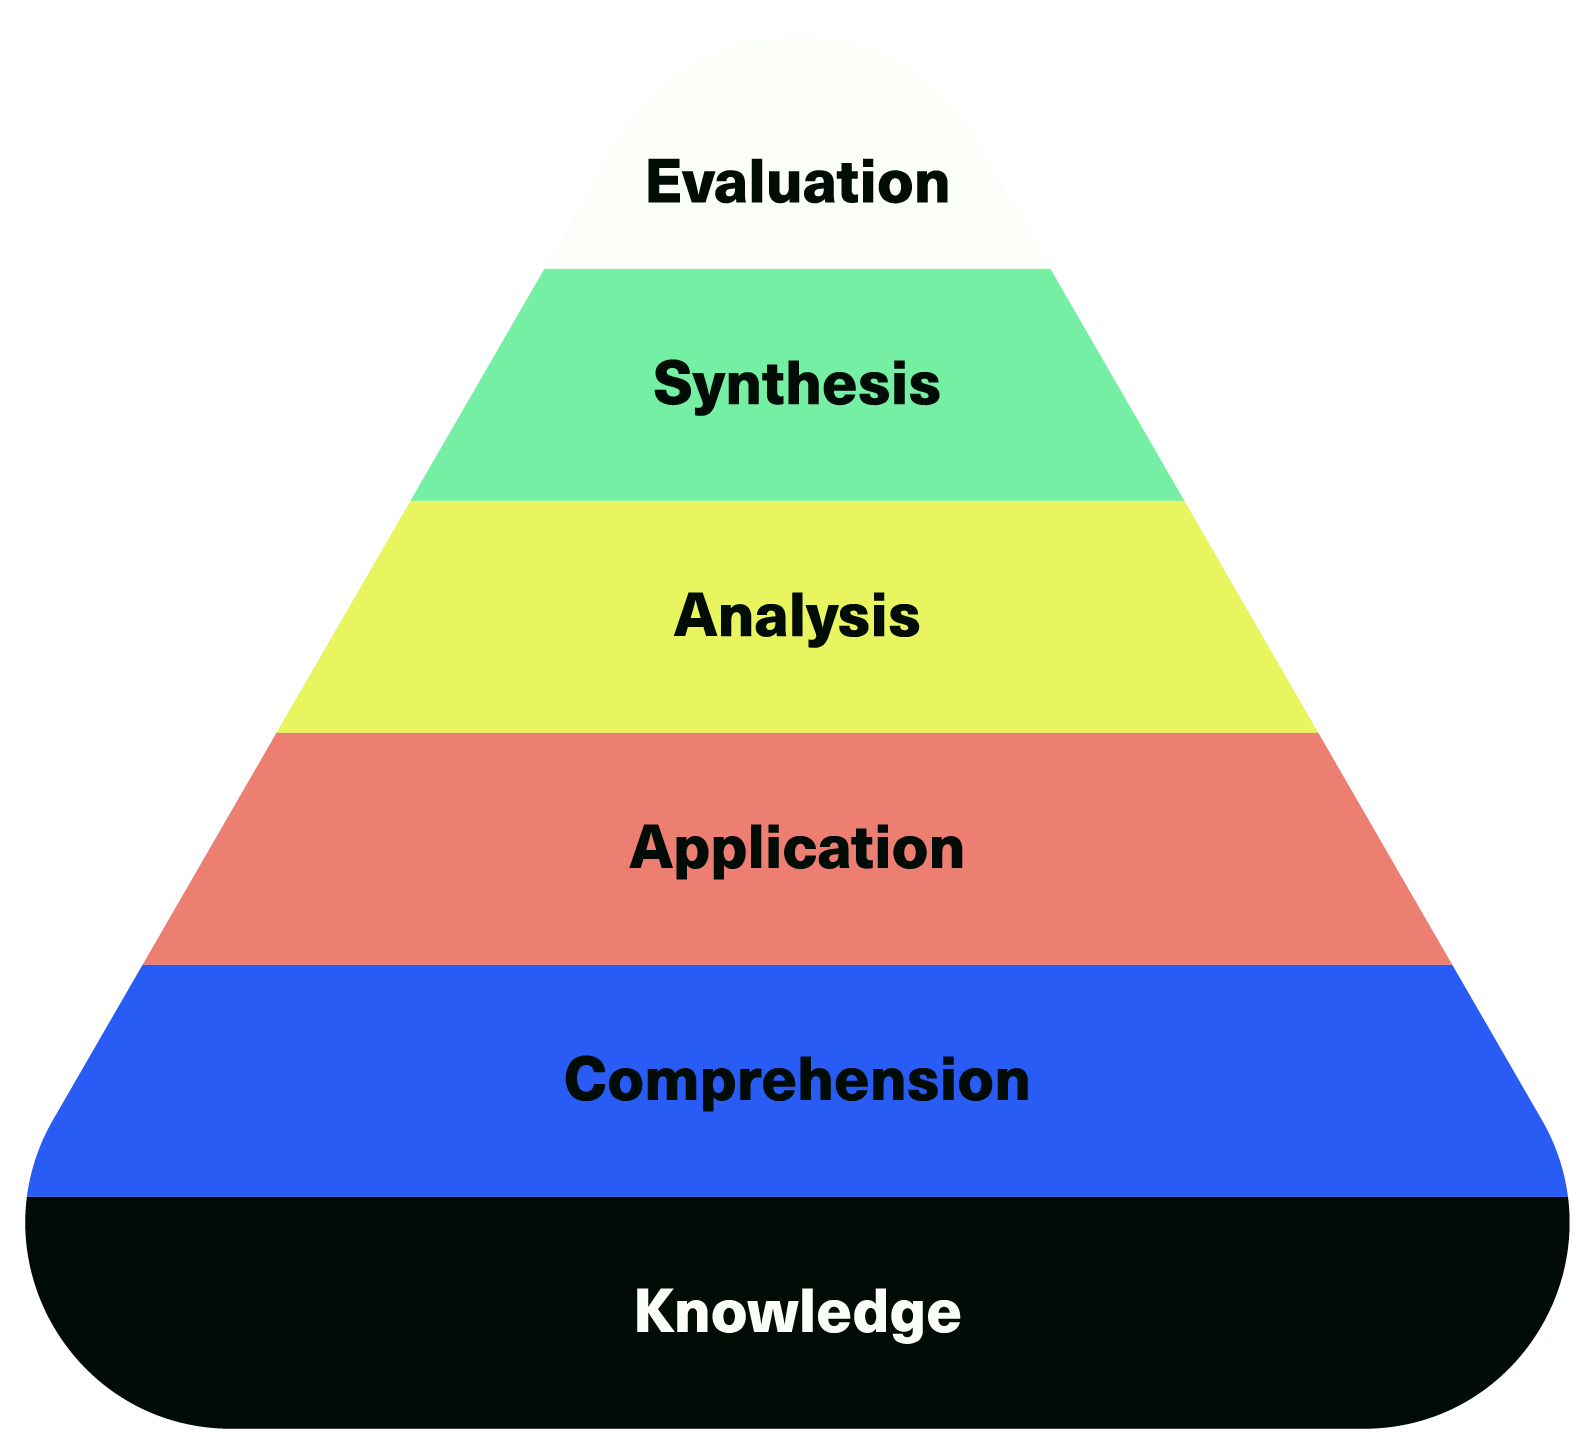 Triangle hierarchy from bottom up: knowledge, comprehension, application, analysis, synthesis, evaluation